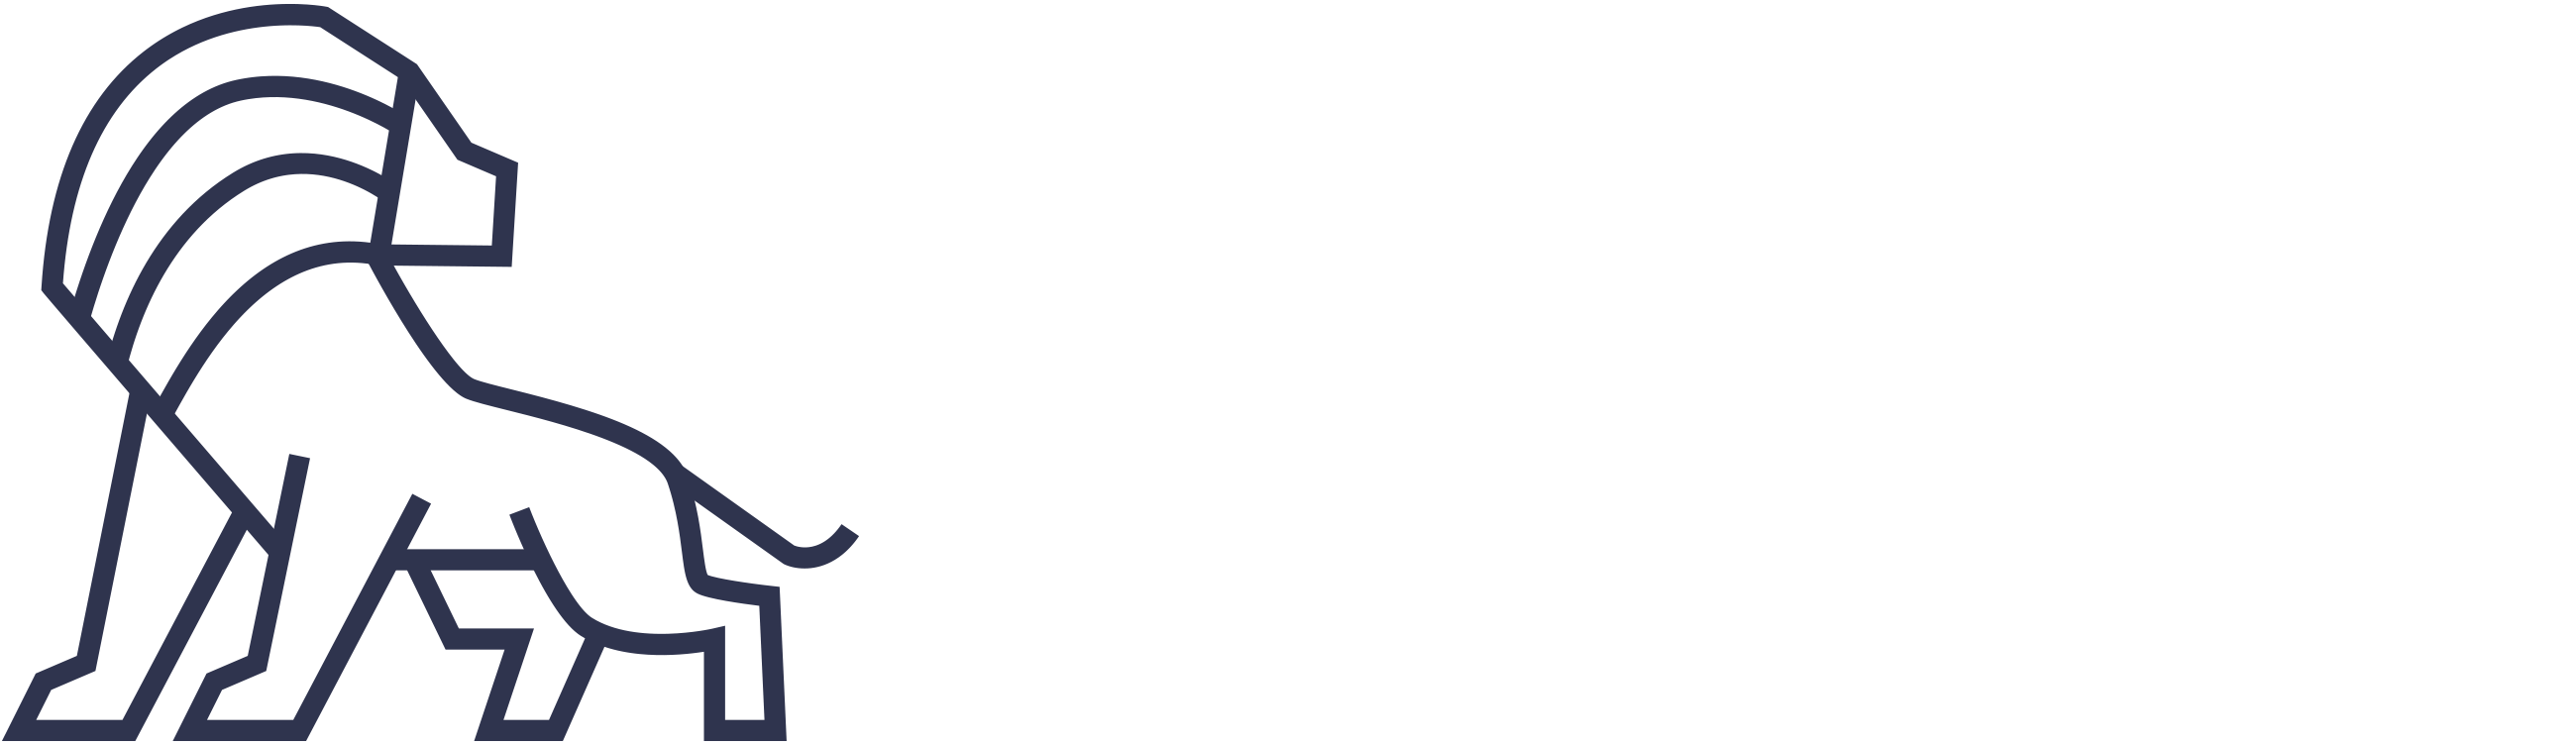 Lions Network